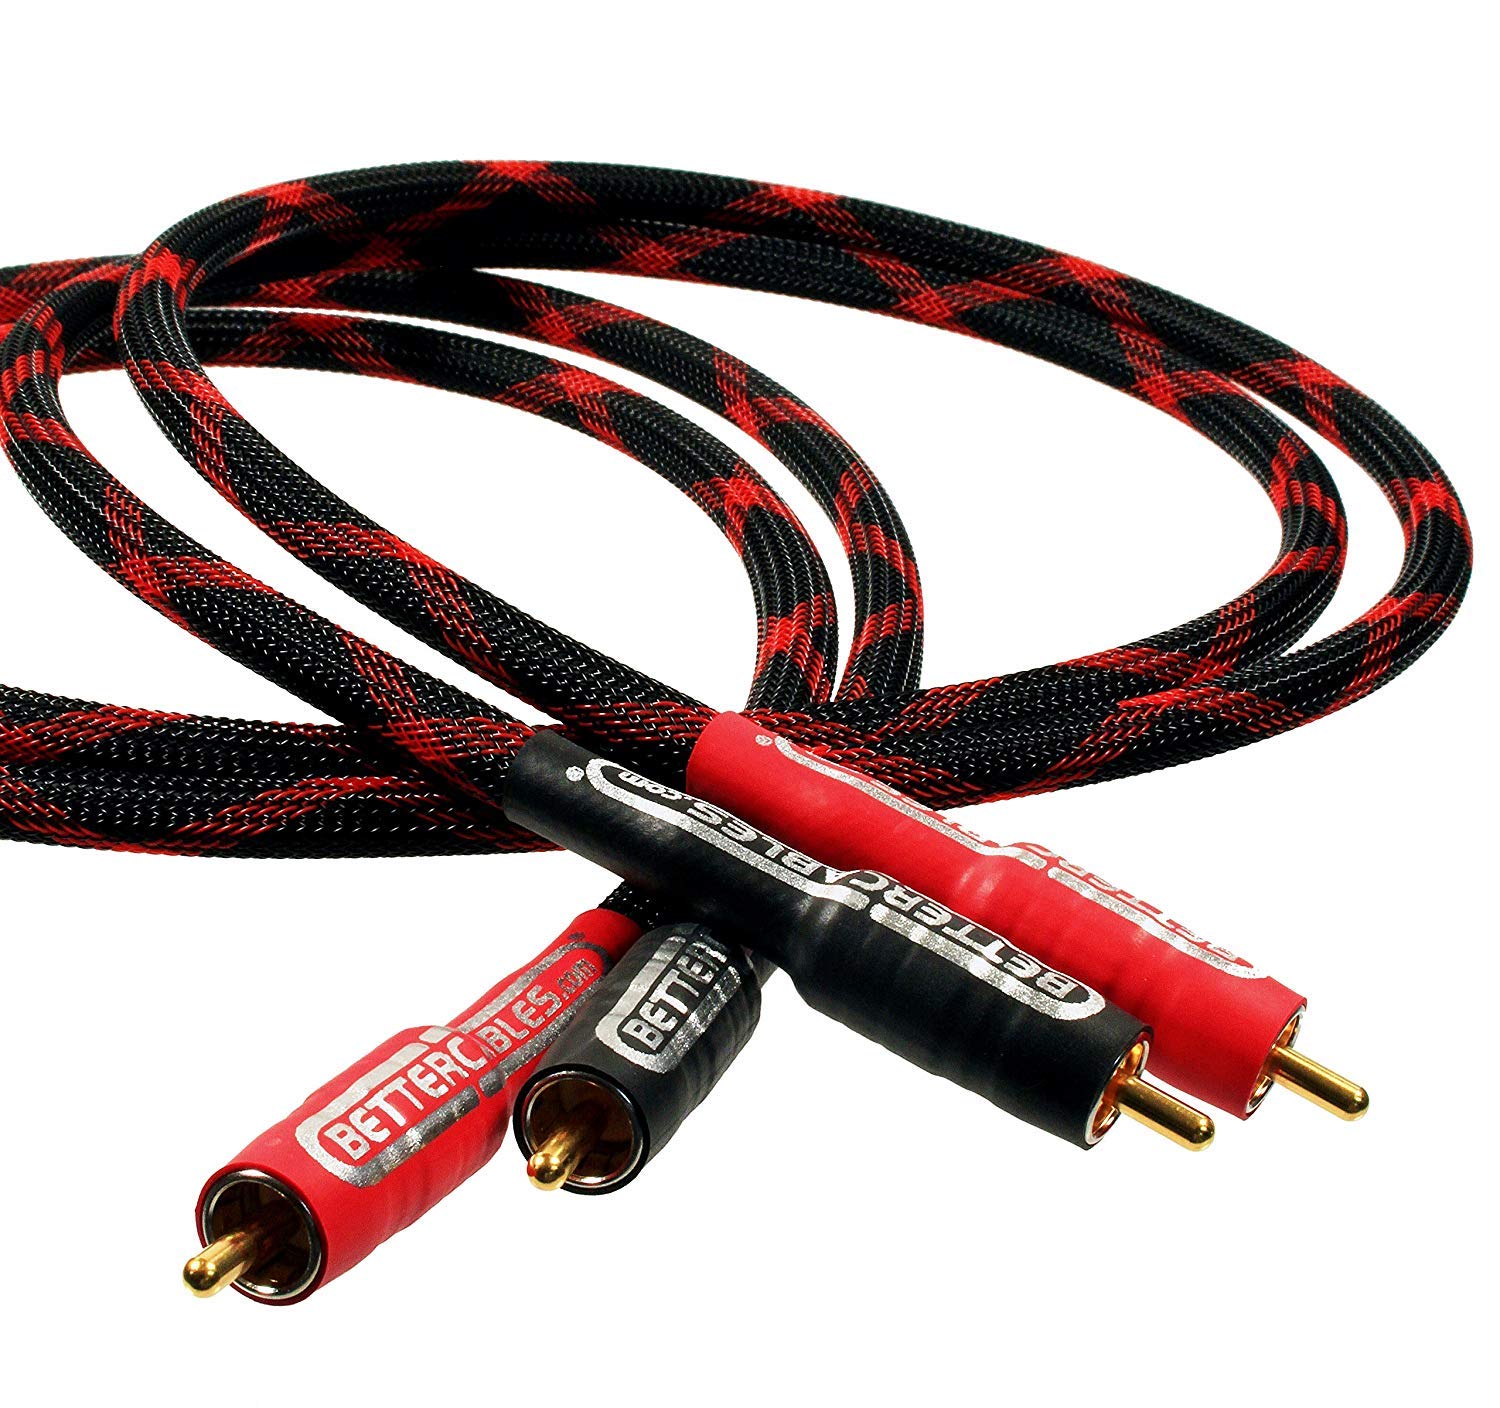 15 Feet Better Cables Silver Serpent Anniversary Edition Red/Black RCA Audio Interconnect Cables - Stereo Pair (2 Cables) High-End, High-Performanc...